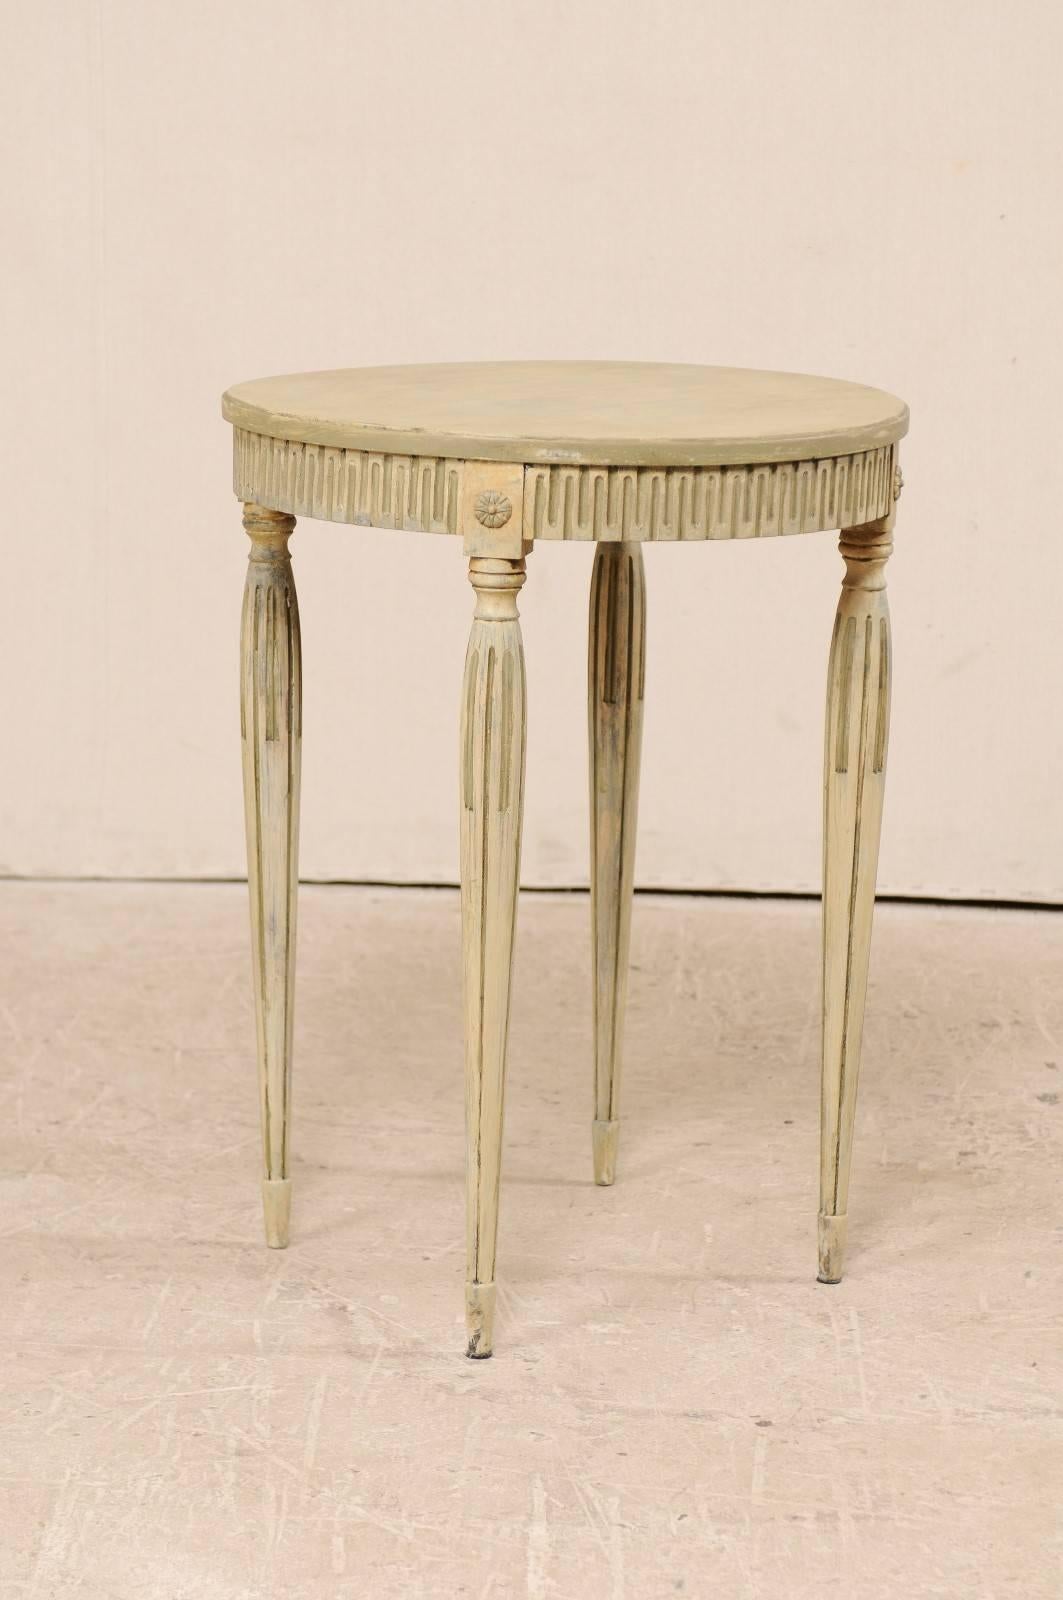 A vintage Swedish carved and painted wood occasional table. This sweet little Swedish side table features a circular-shaped shaped top, nicely carved apron, and rosettes carved just above each leg. The table is raised nicely on four rounded legs,